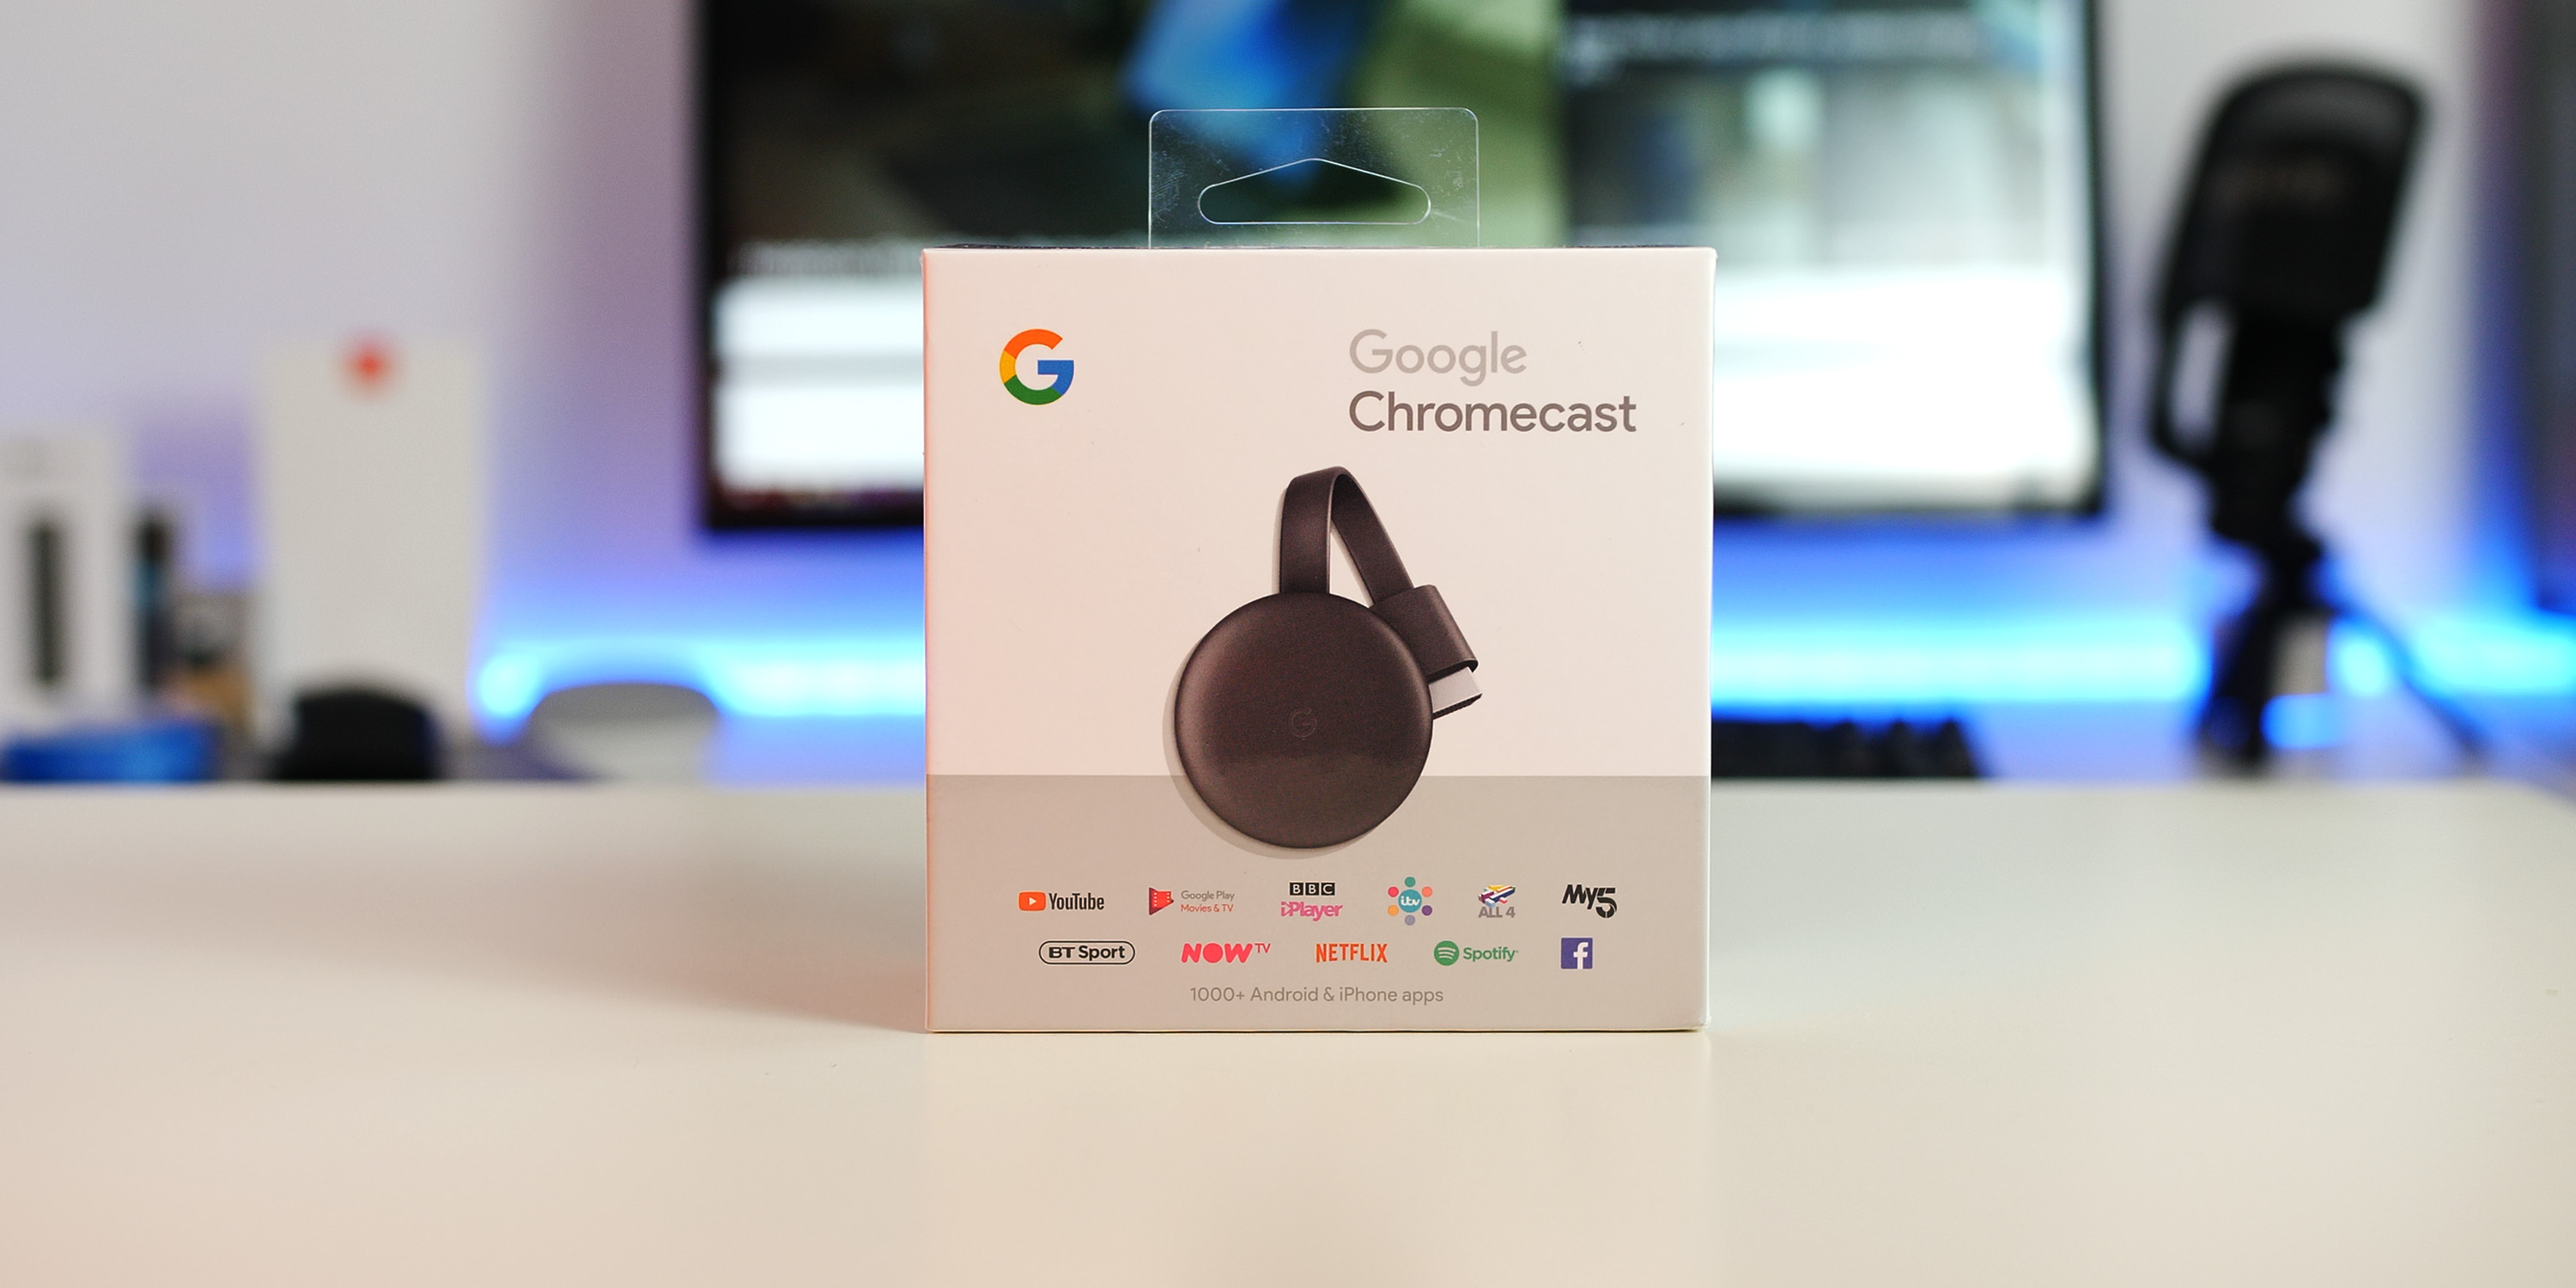 pølse Higgins Hates Review: The new Google Chromecast is much the same w/ some solid upgrades  [Video]